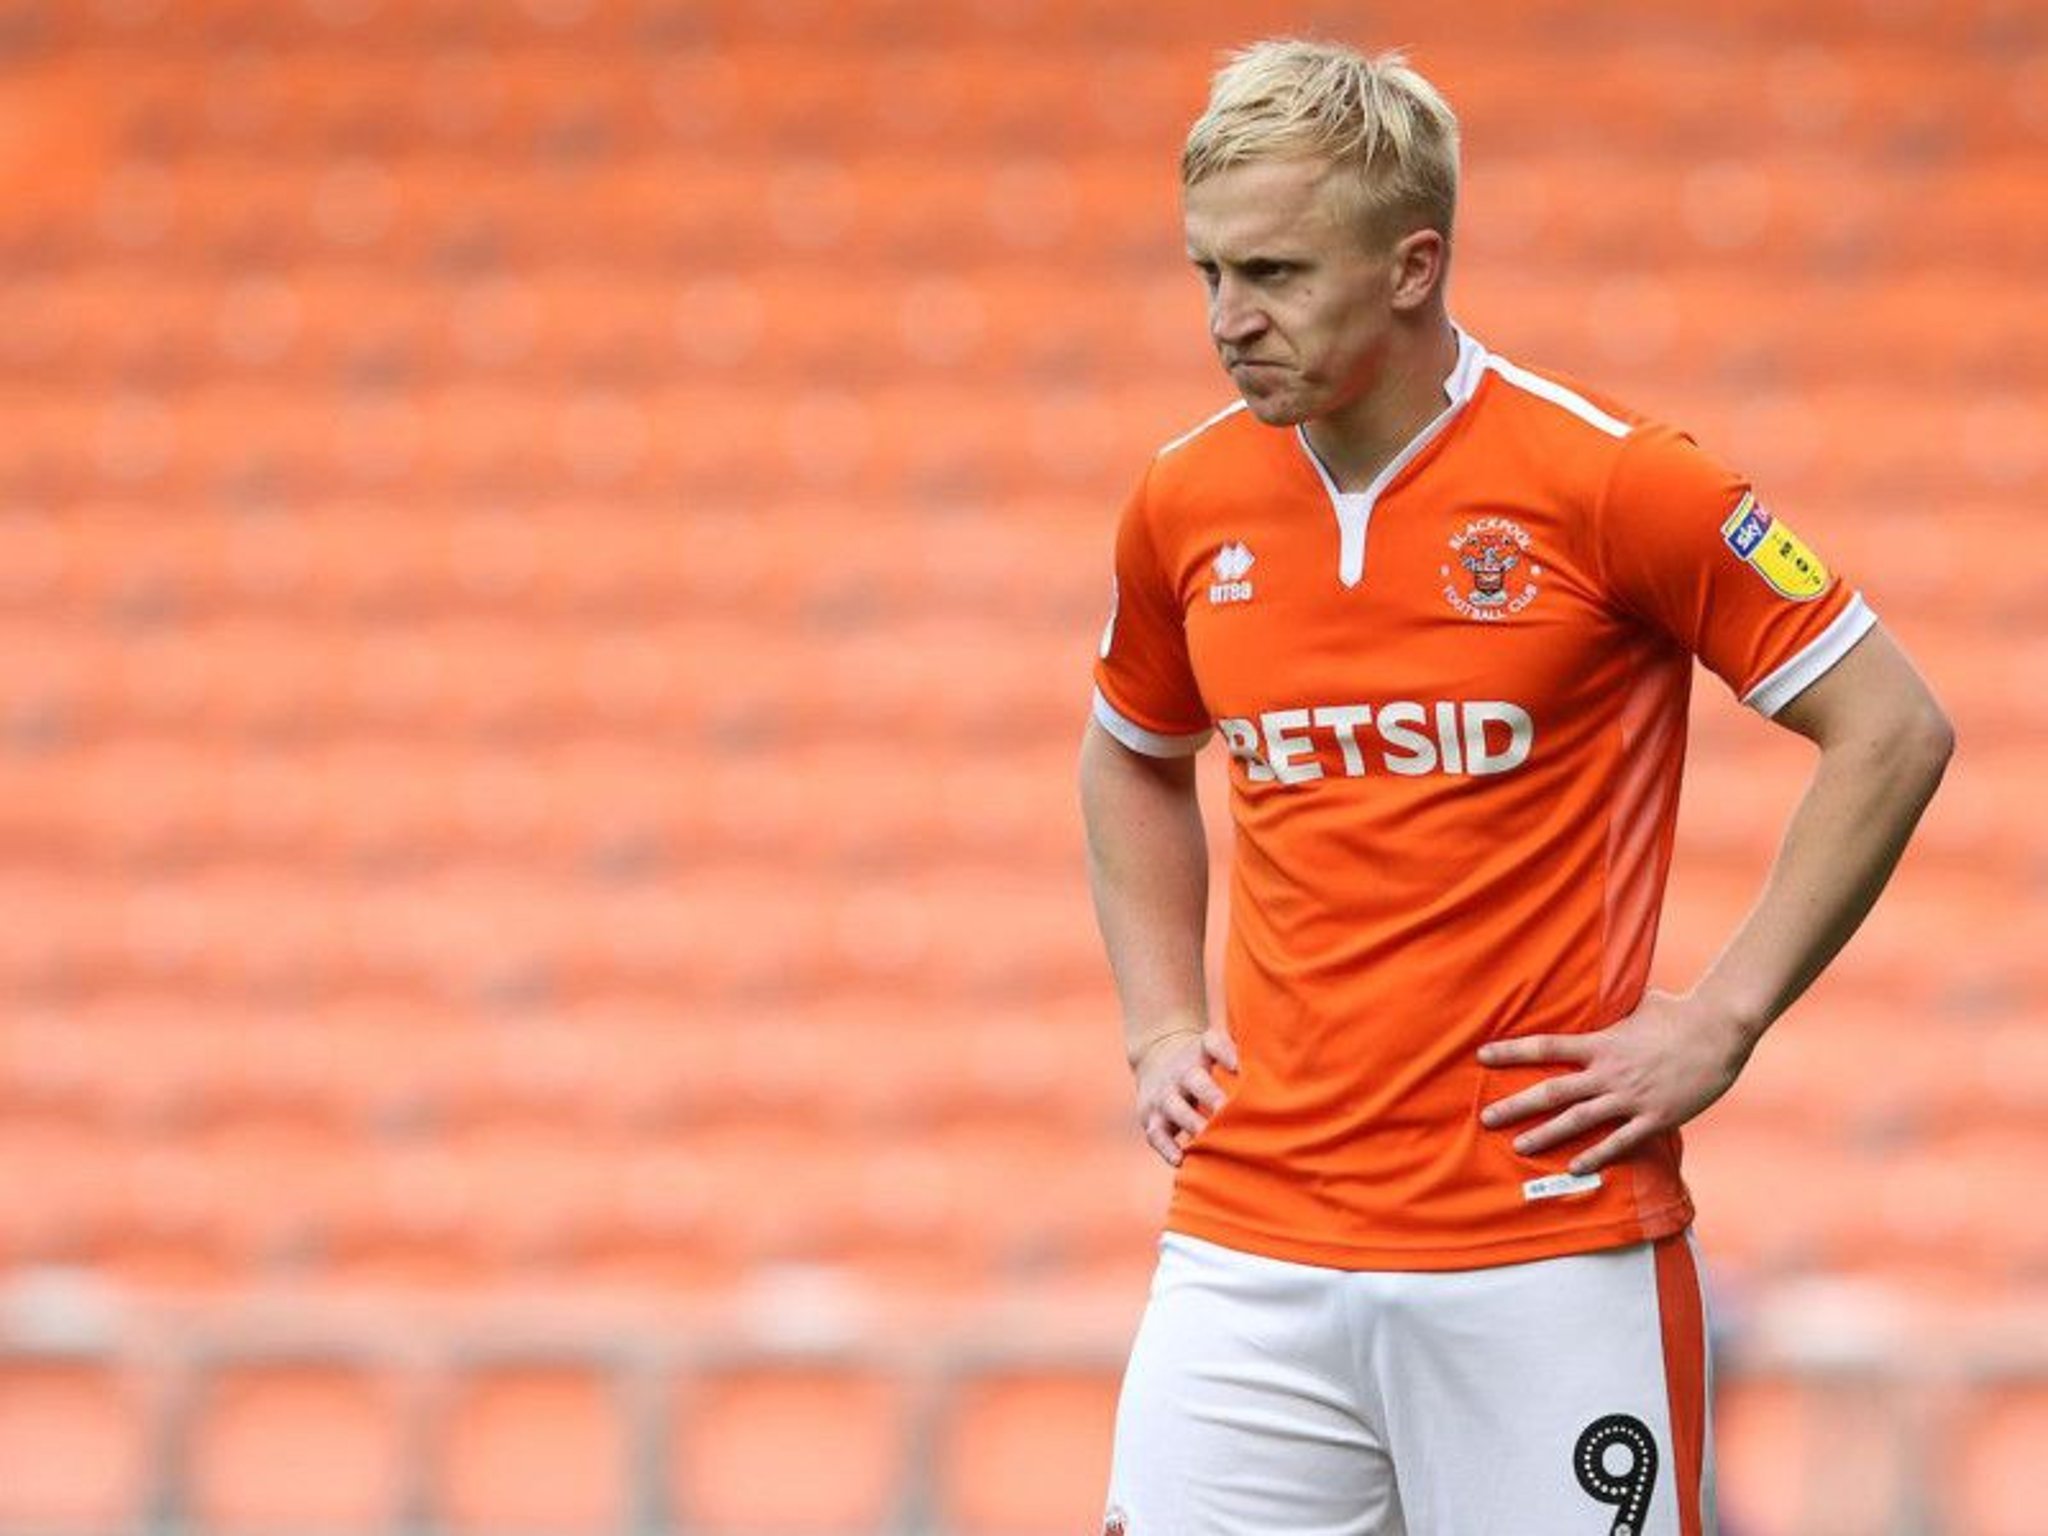 Blackpool's Mark Cullen looking to add another promotion to his CV with Carlisle loan move